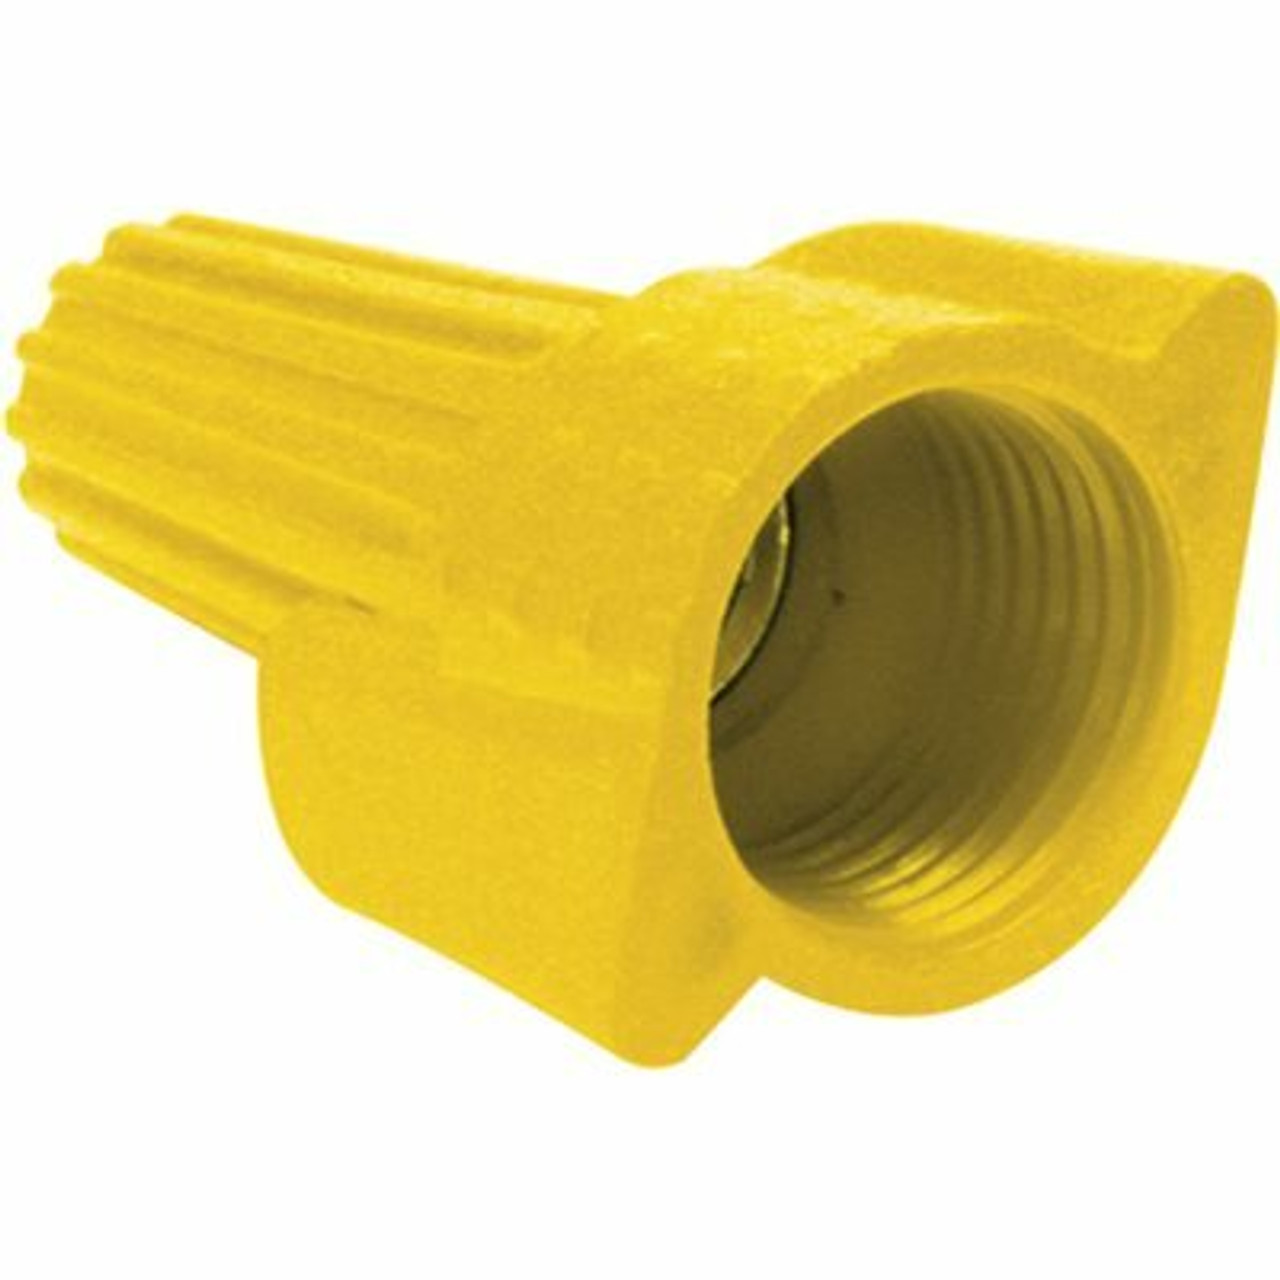 Preferred Industries Wing-Type Wire Connector, Yellow (100-Pack)